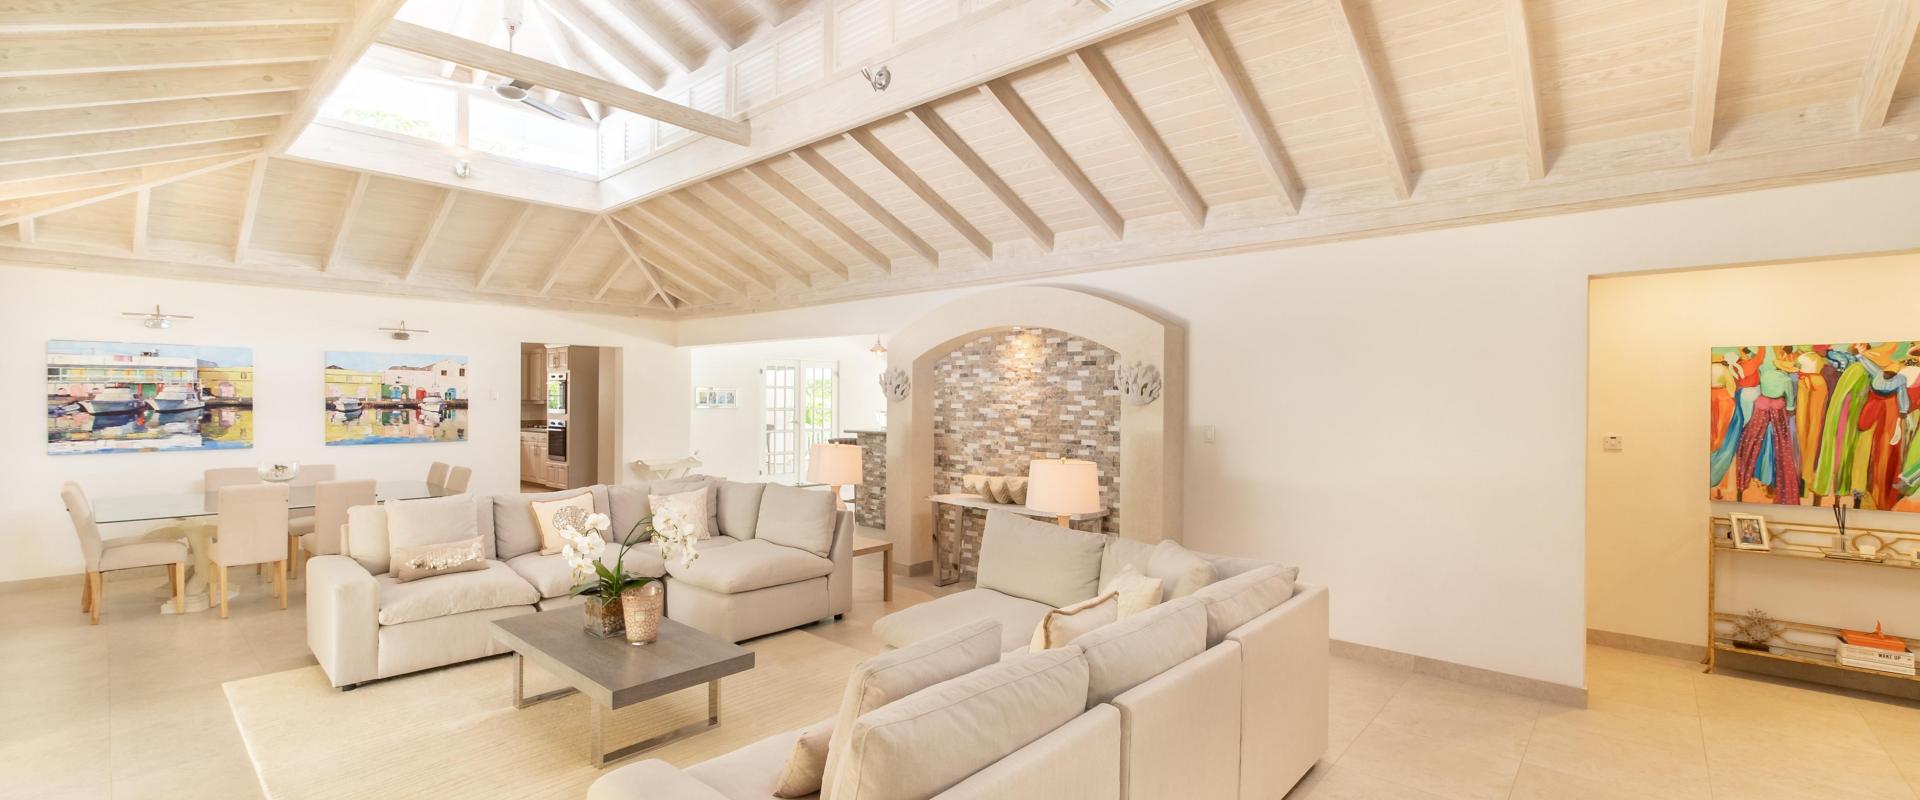 Palm Tree Villa Sandy Lane Barbados Living Room with Vaulted Ceiling